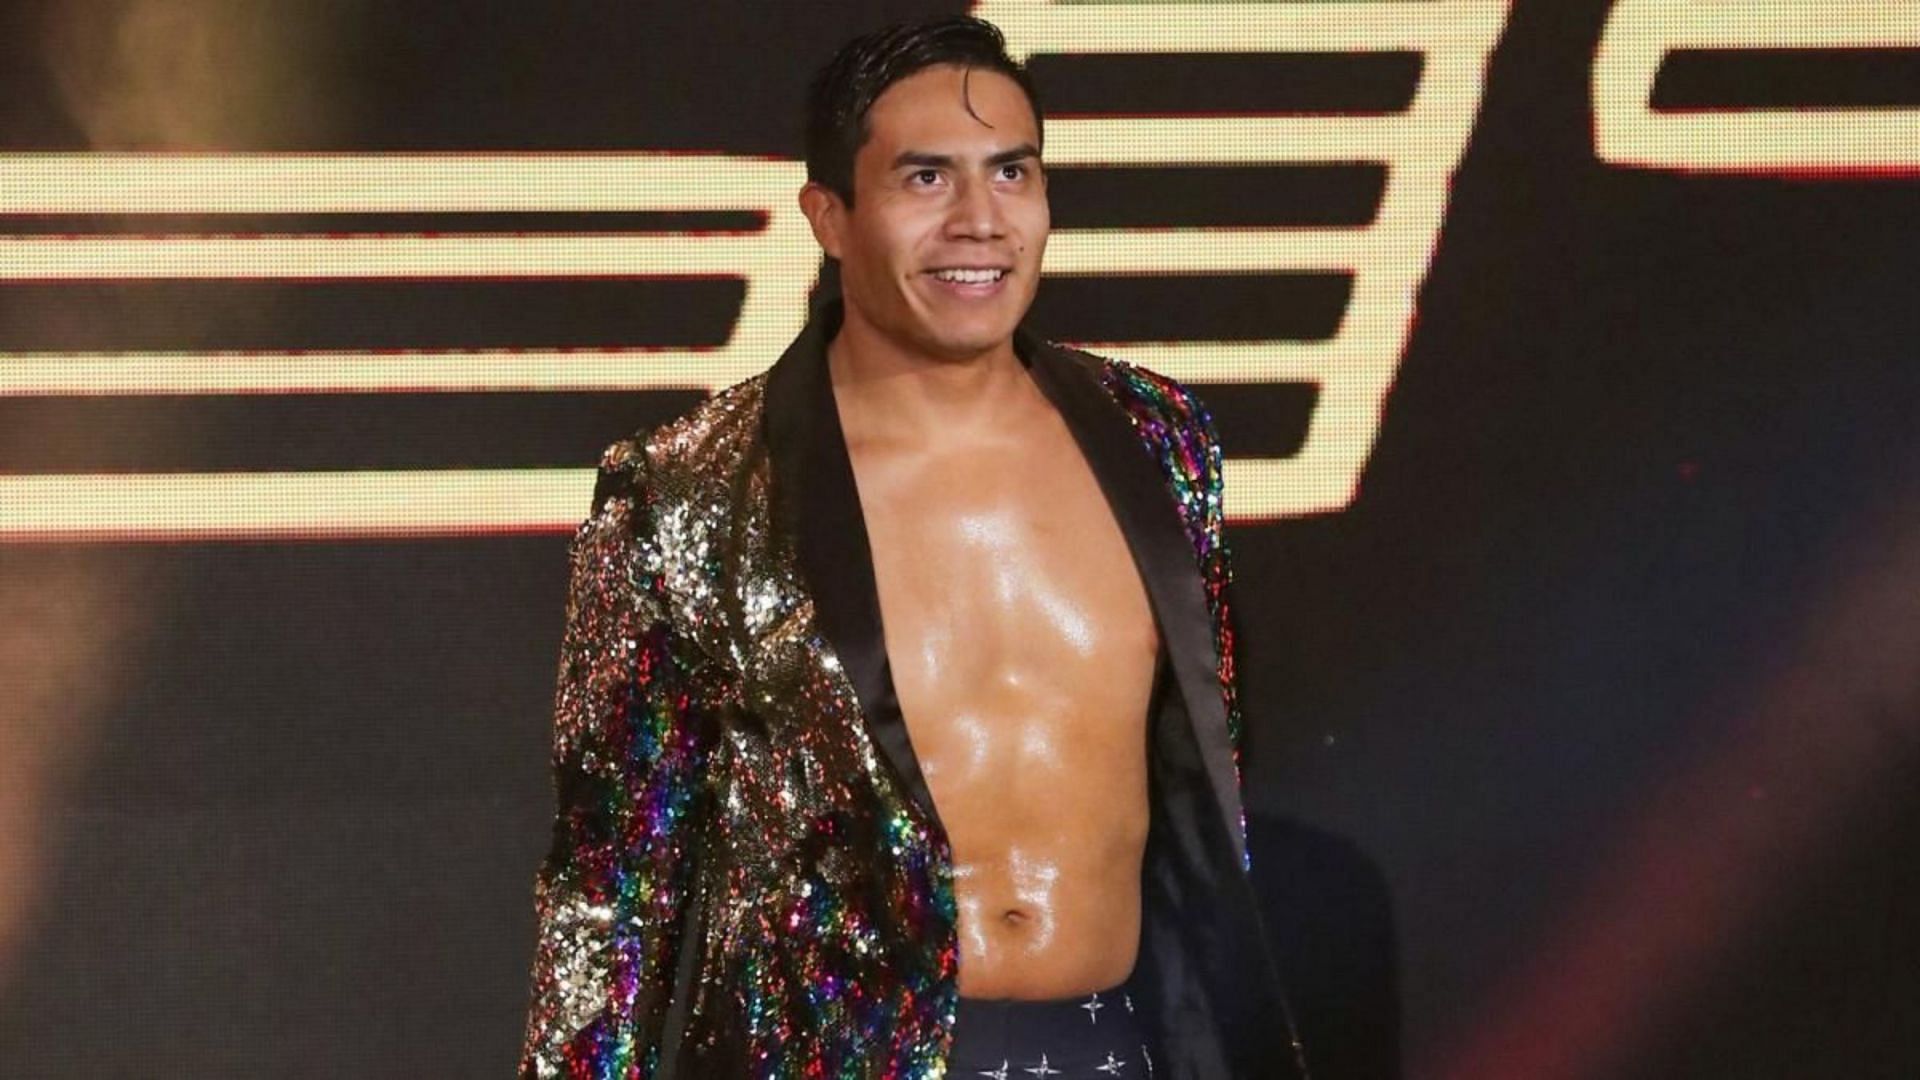 Jake Atlas recently came out of retirement to join AEW